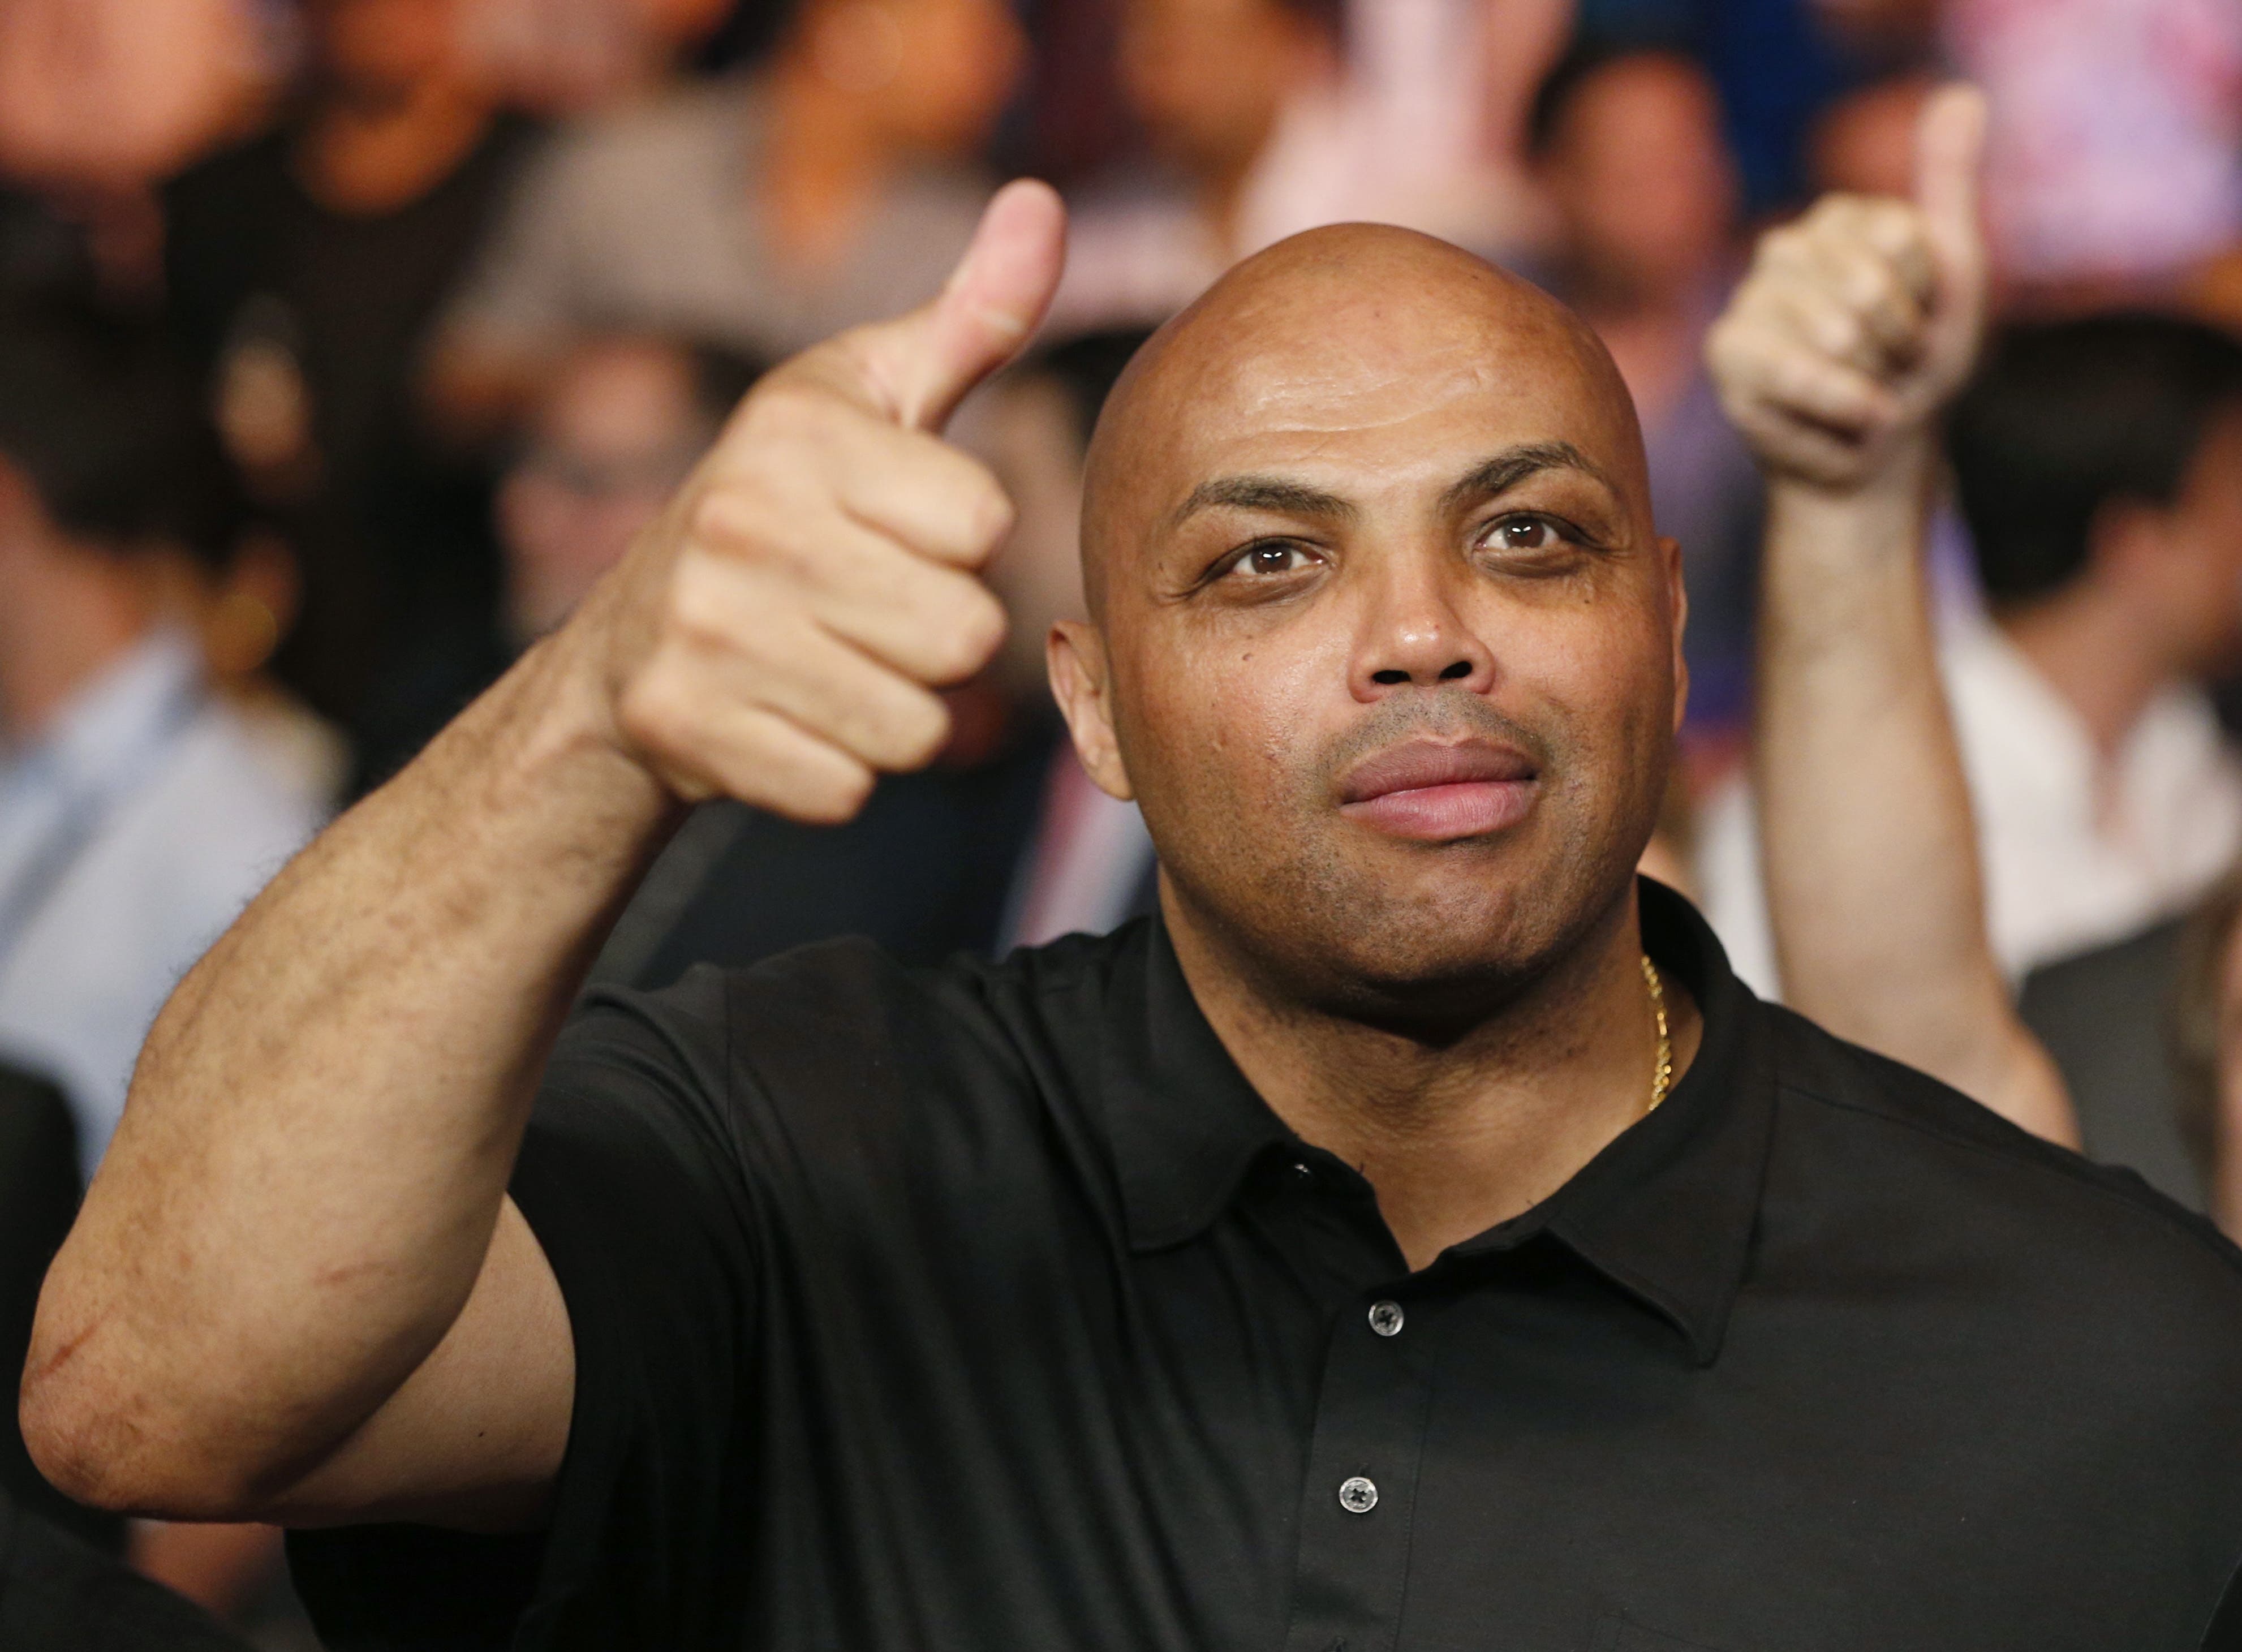 Charles Barkley joins the crowd before the start of the world welterweight championship. (AP)